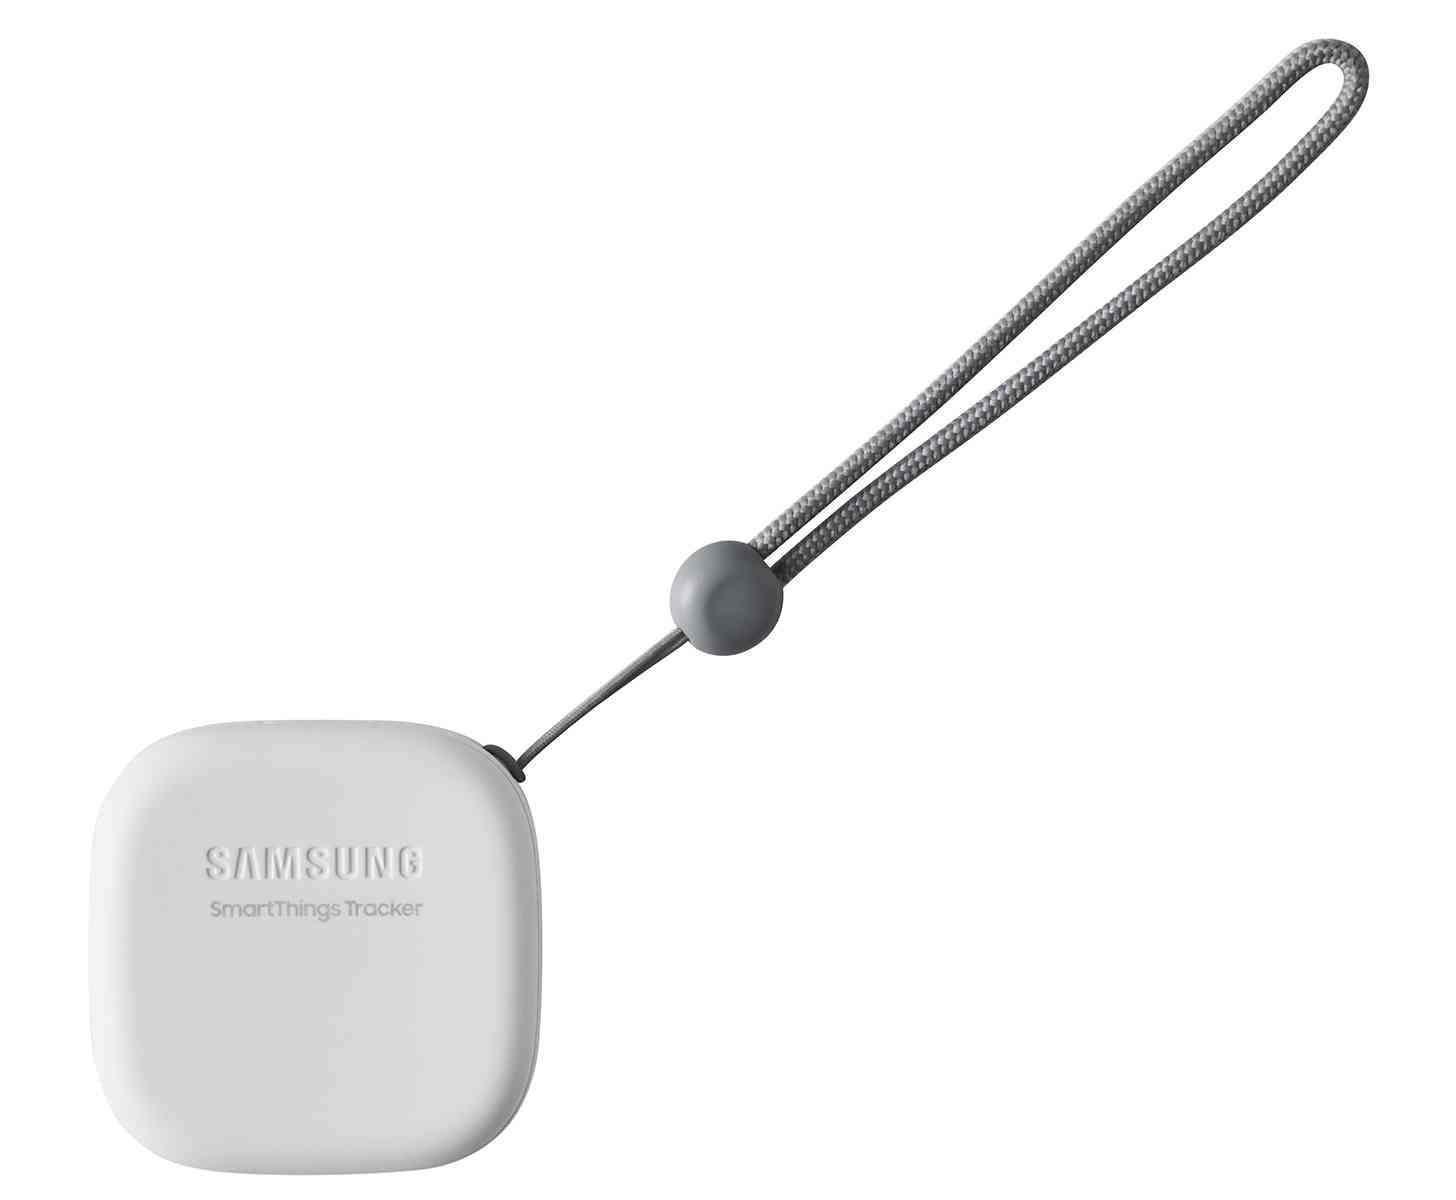 Samsung SmartThings tracker close-up